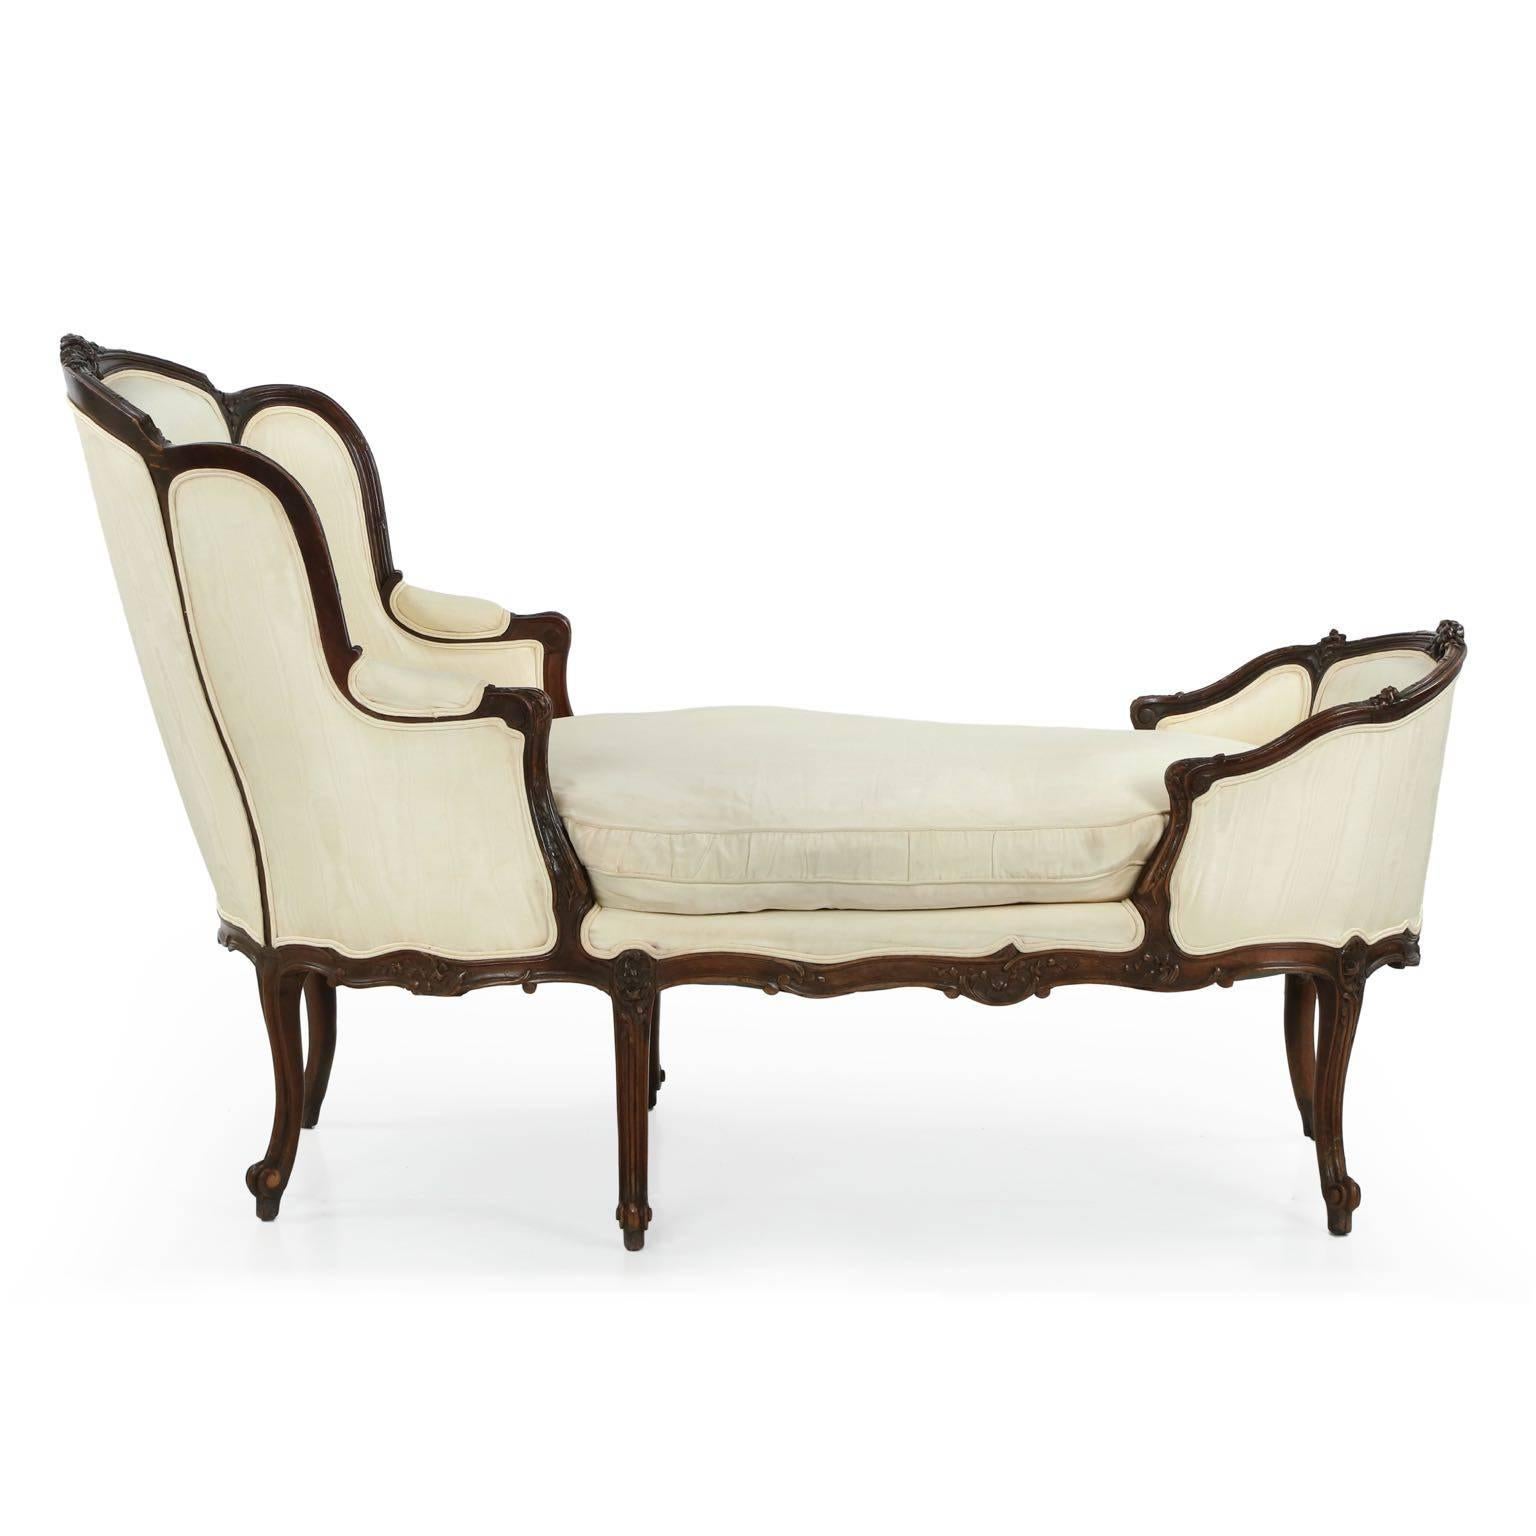 Noteworthy for it’s petite and overall delicate proportions, this very attractive chaise longue is crafted in the Louis XV taste probably during the last quarter of the 19th century. The dark walnut frame is handsomely carved with floral displays in